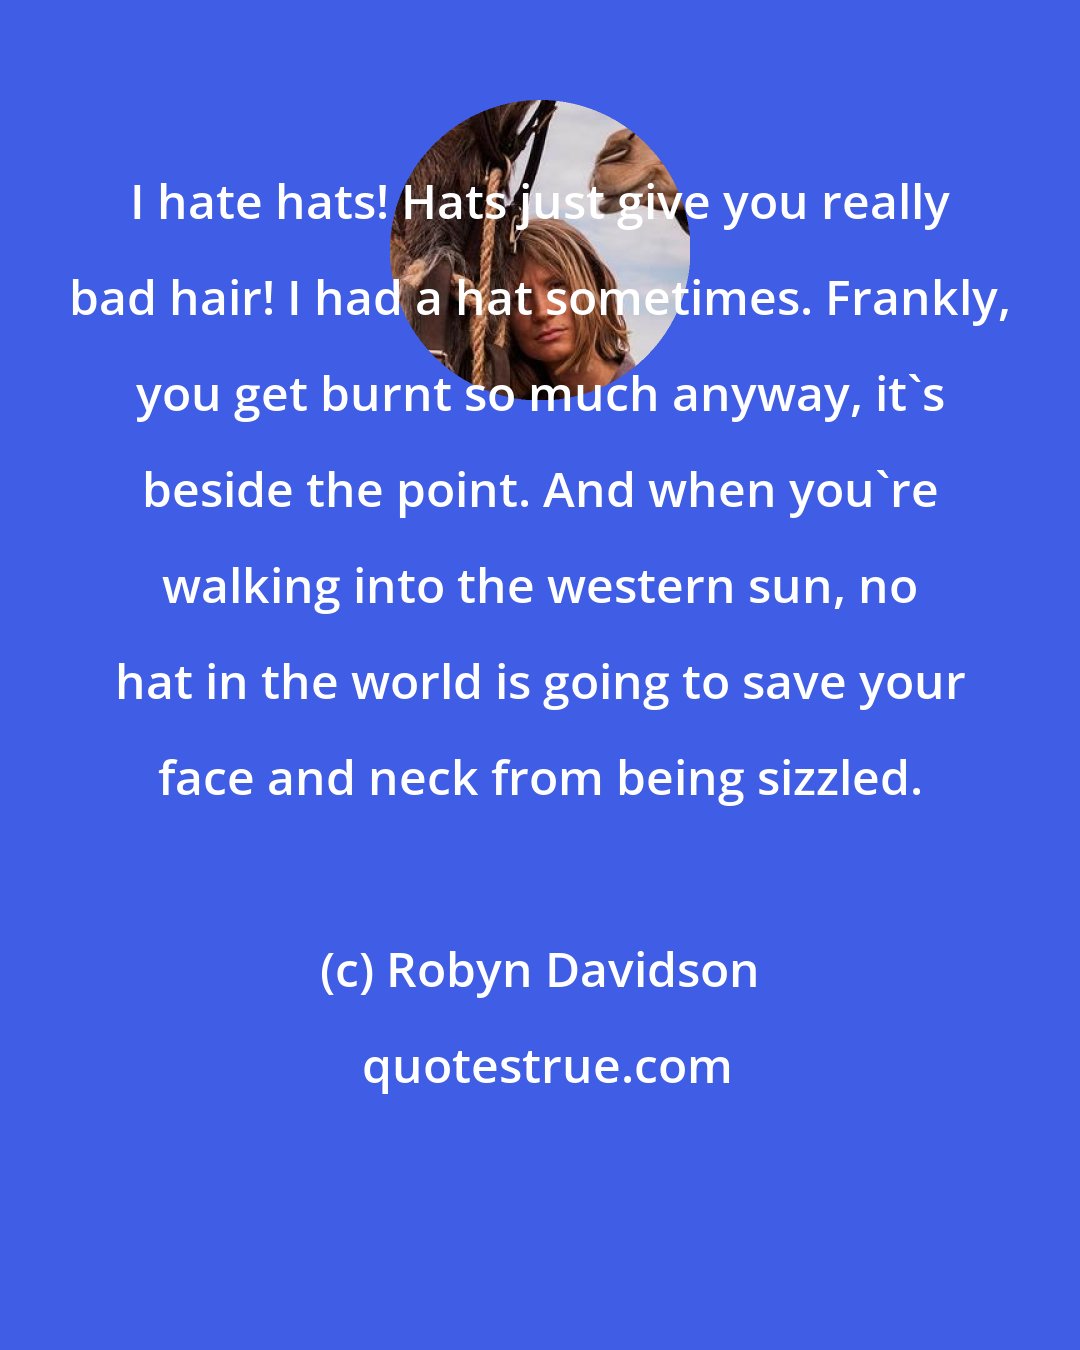 Robyn Davidson: I hate hats! Hats just give you really bad hair! I had a hat sometimes. Frankly, you get burnt so much anyway, it's beside the point. And when you're walking into the western sun, no hat in the world is going to save your face and neck from being sizzled.